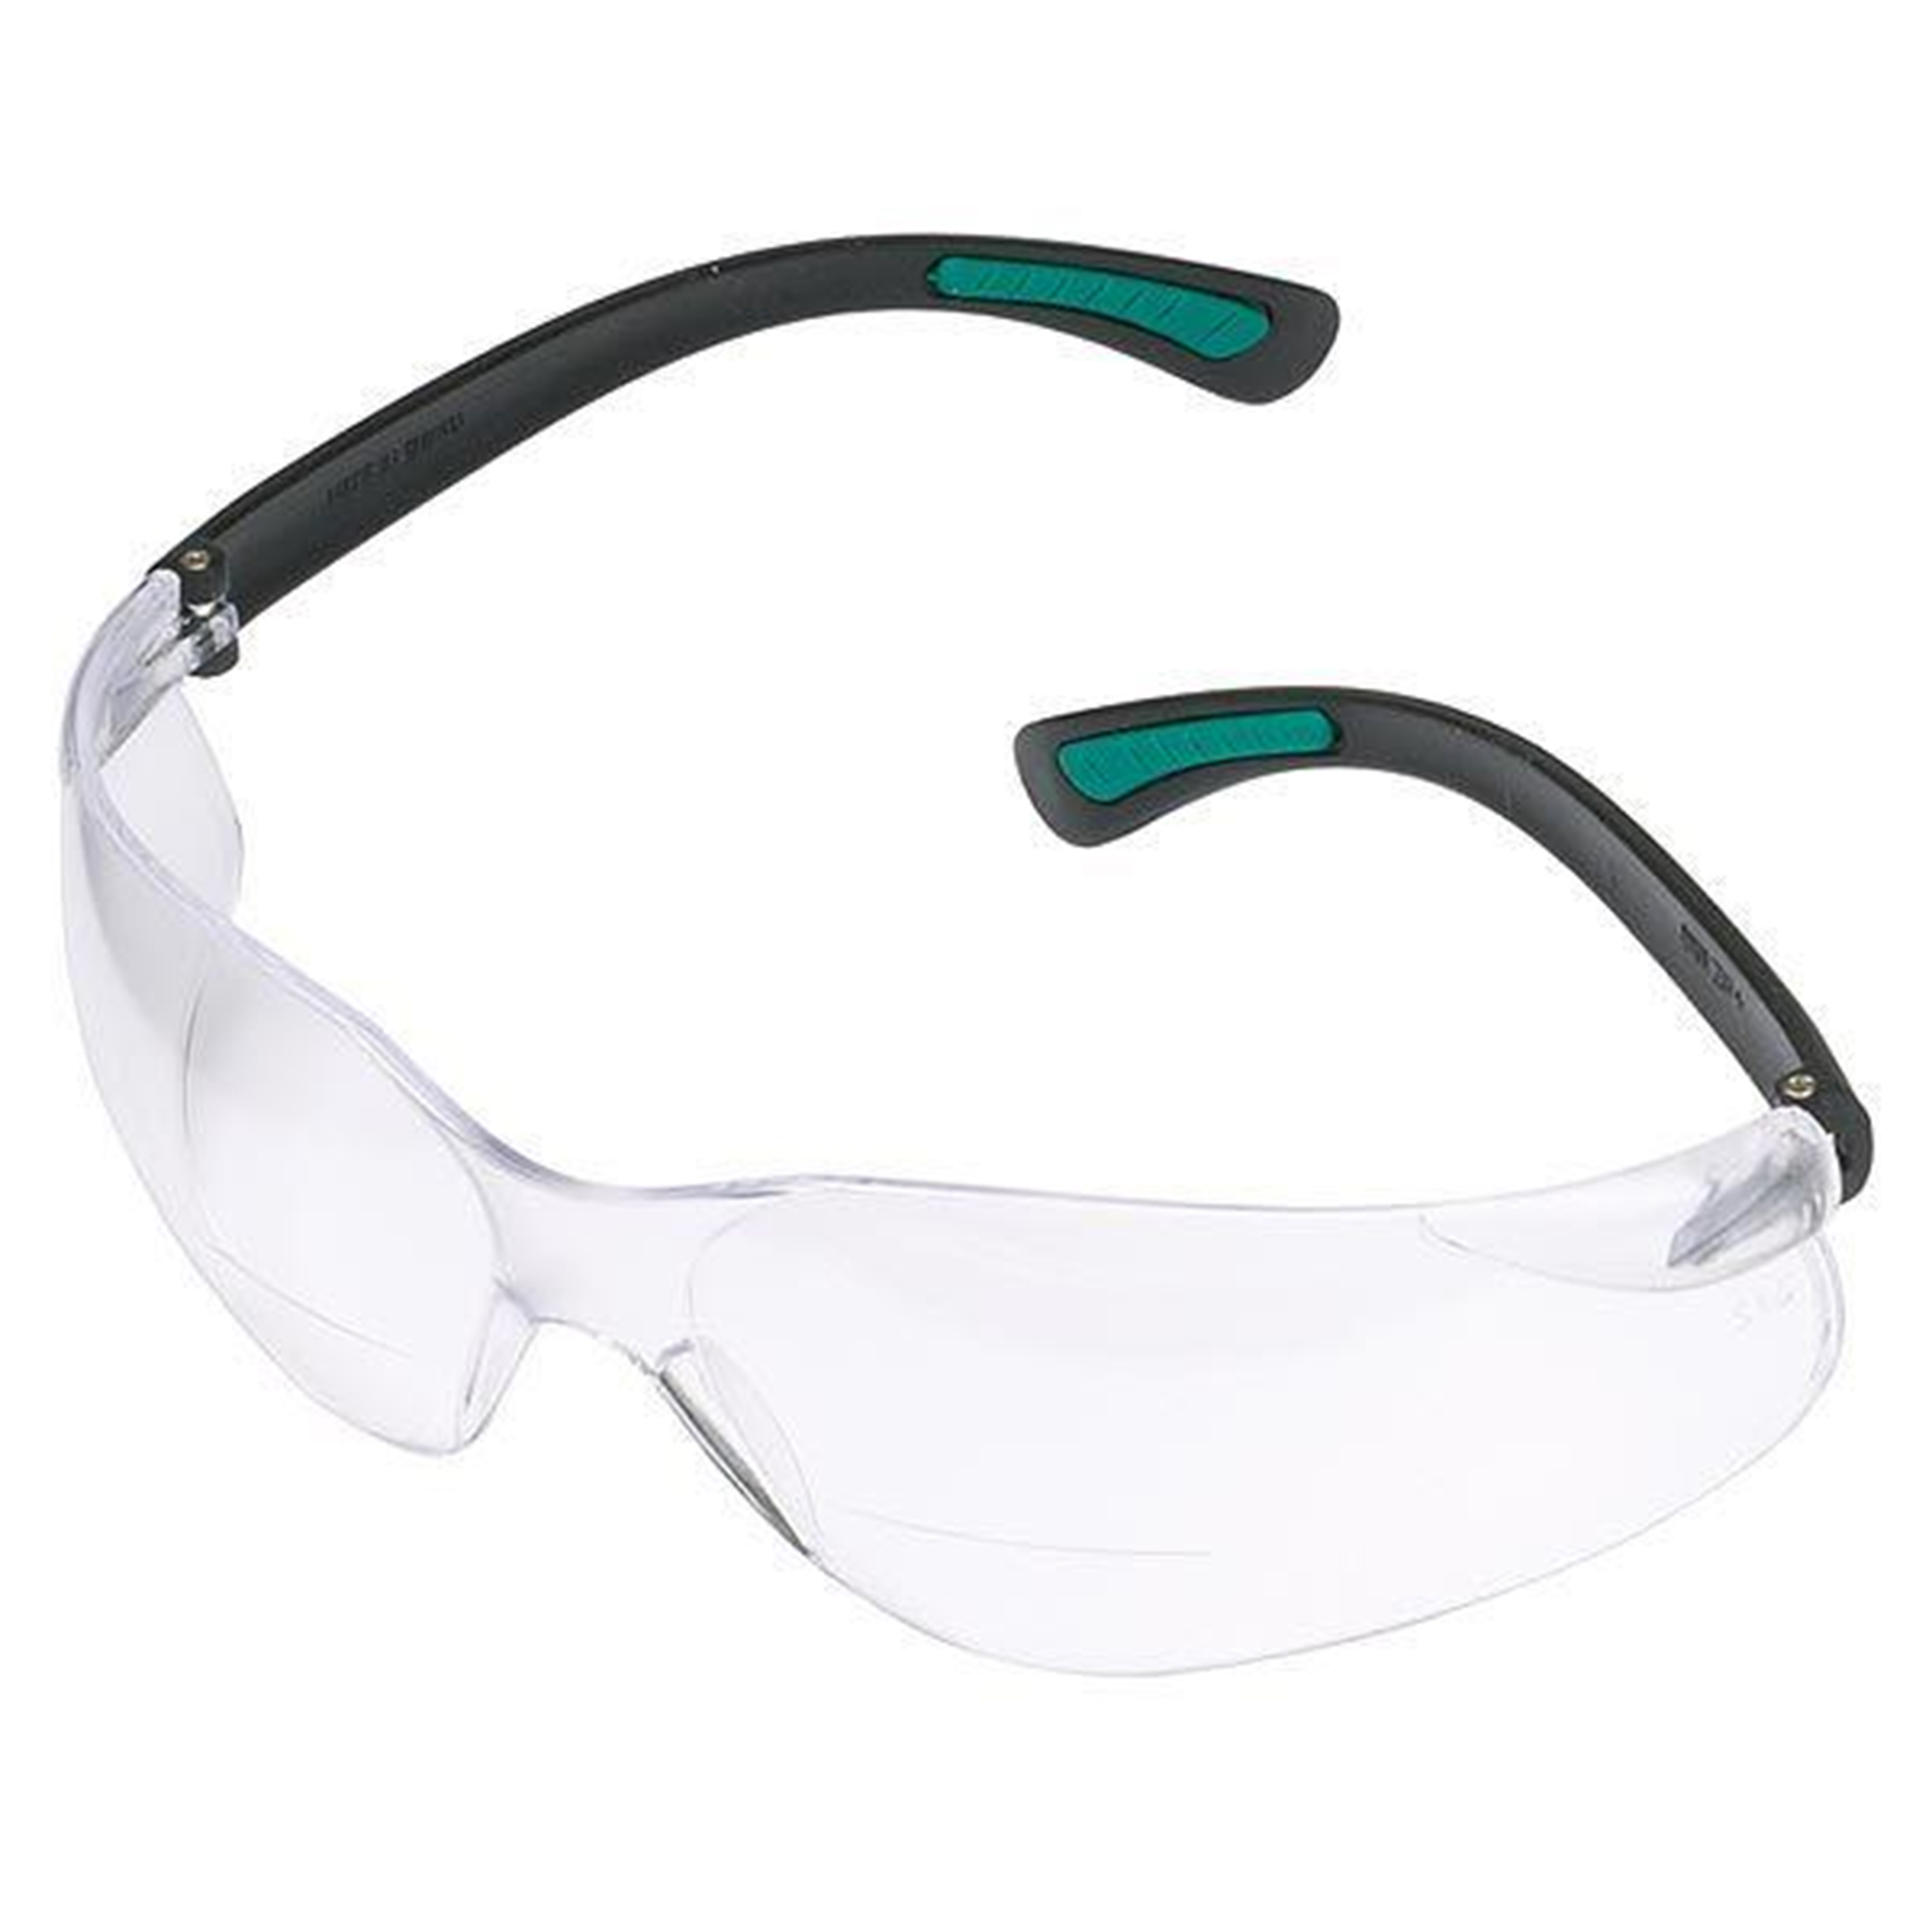 Magnifying Bifocal Safety Glasses 1.5 Diopter